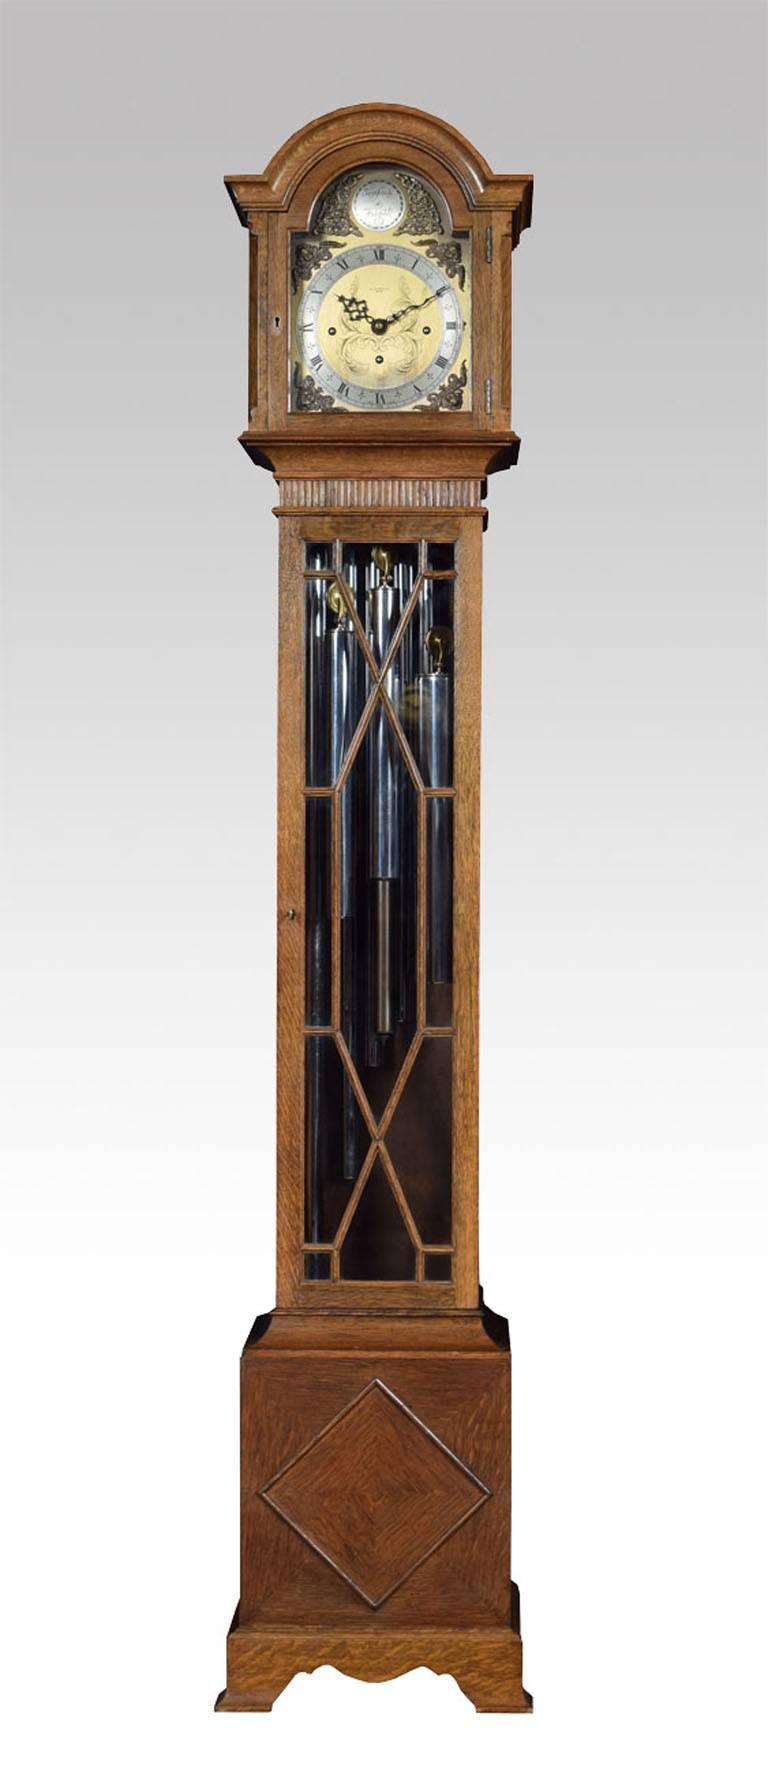 

Edwardian  Oak tube chiming clock, the eight-day tripple-train movement with anchor escapement and striking the hours and chiming the quarters on five chiming tubes, the arched brass dial engraved with gilt-metal Roman numerals and decorated